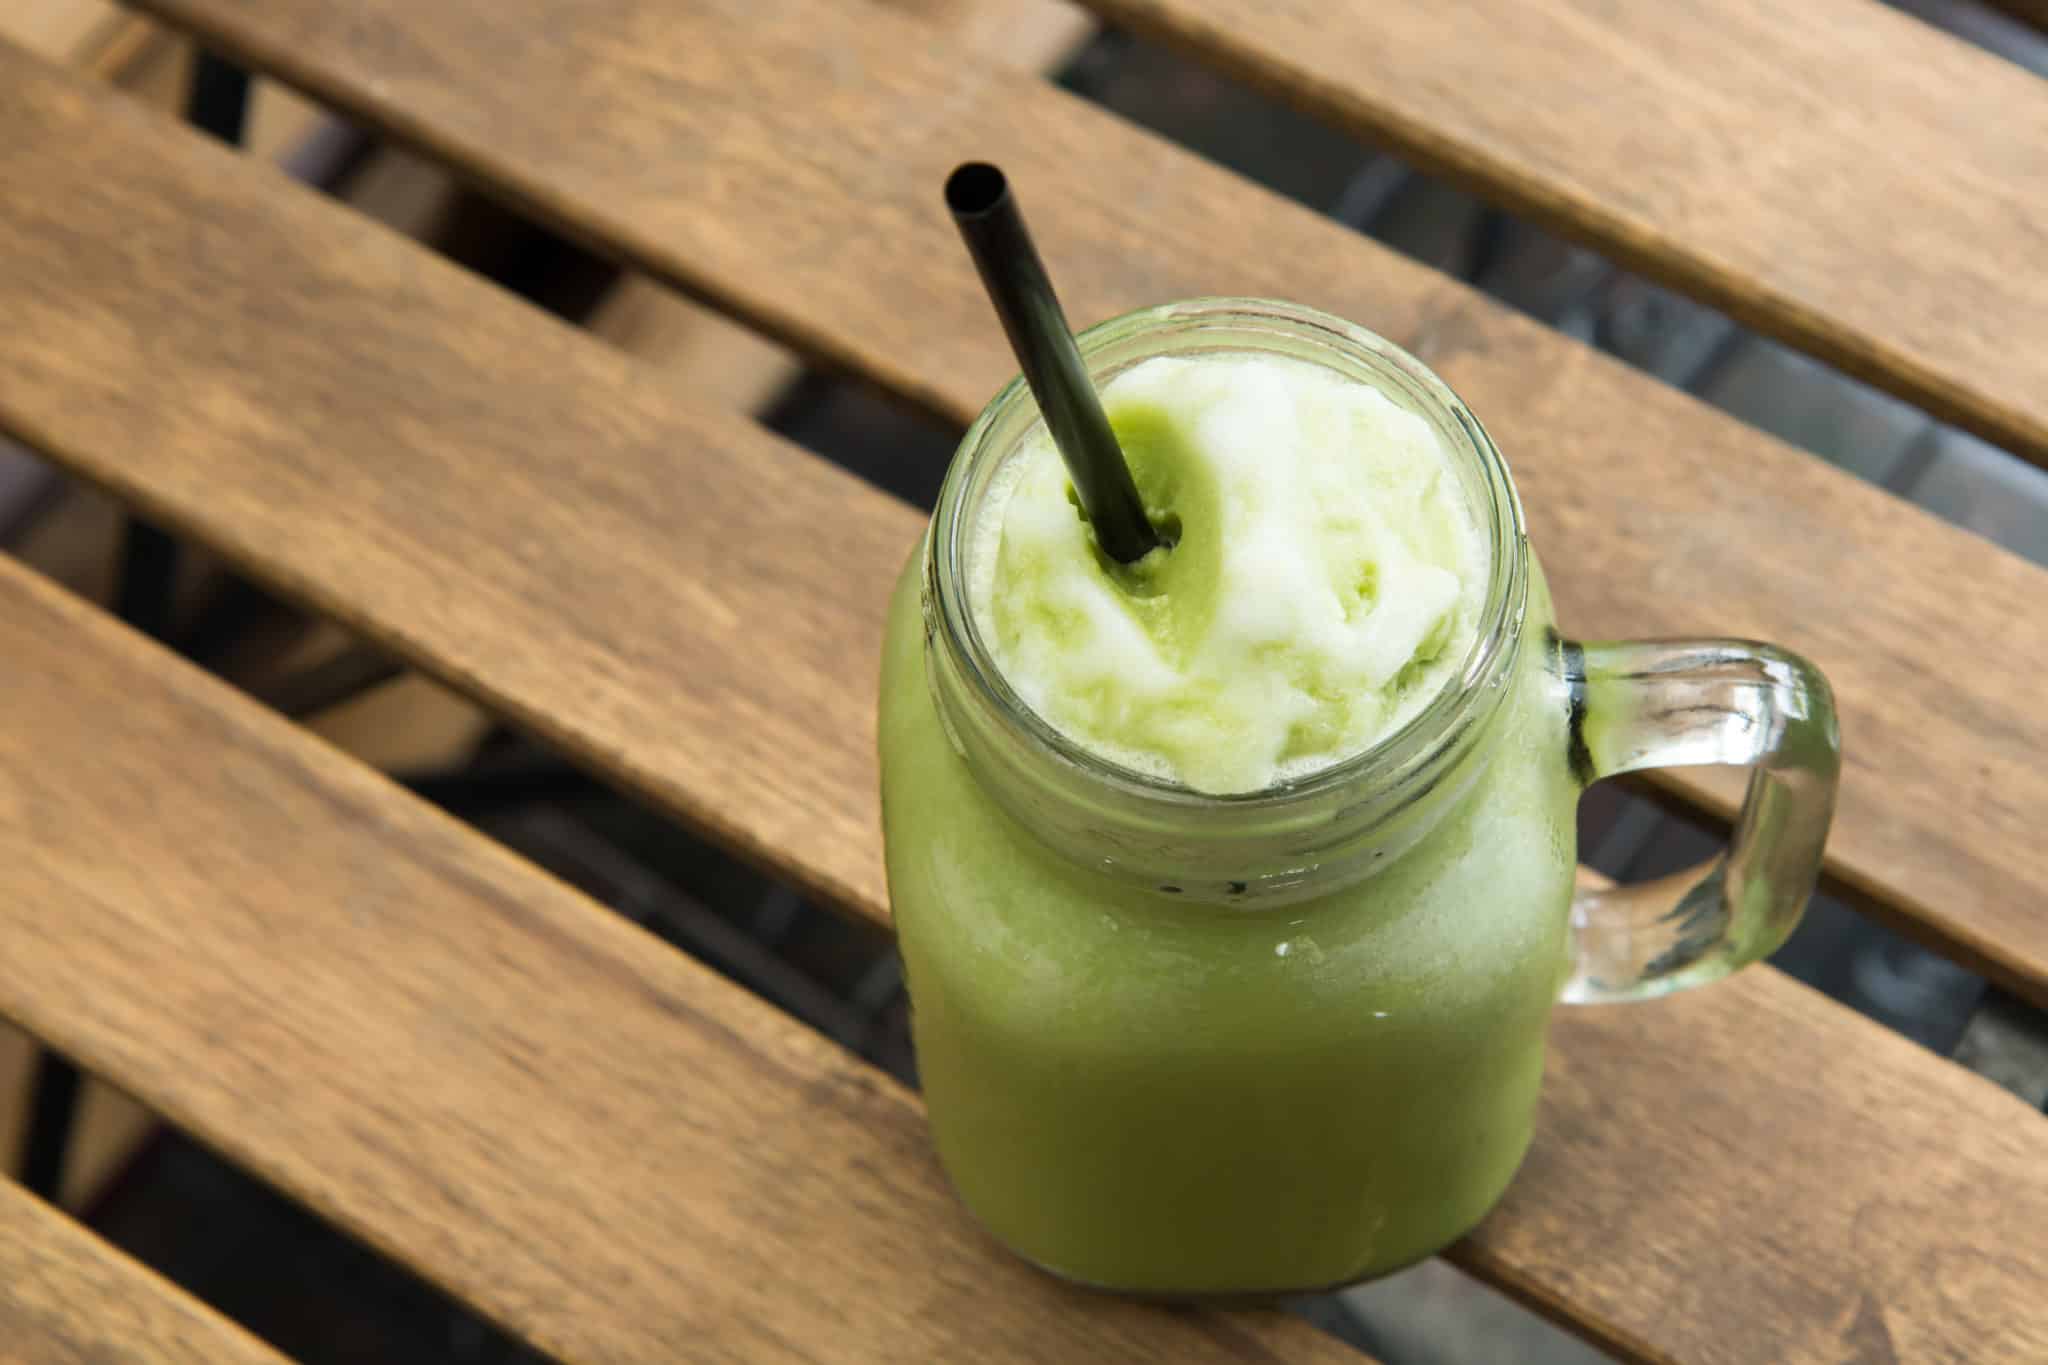 You need to try these 4 ways to include matcha in your diet. Believe us, they're not hard!